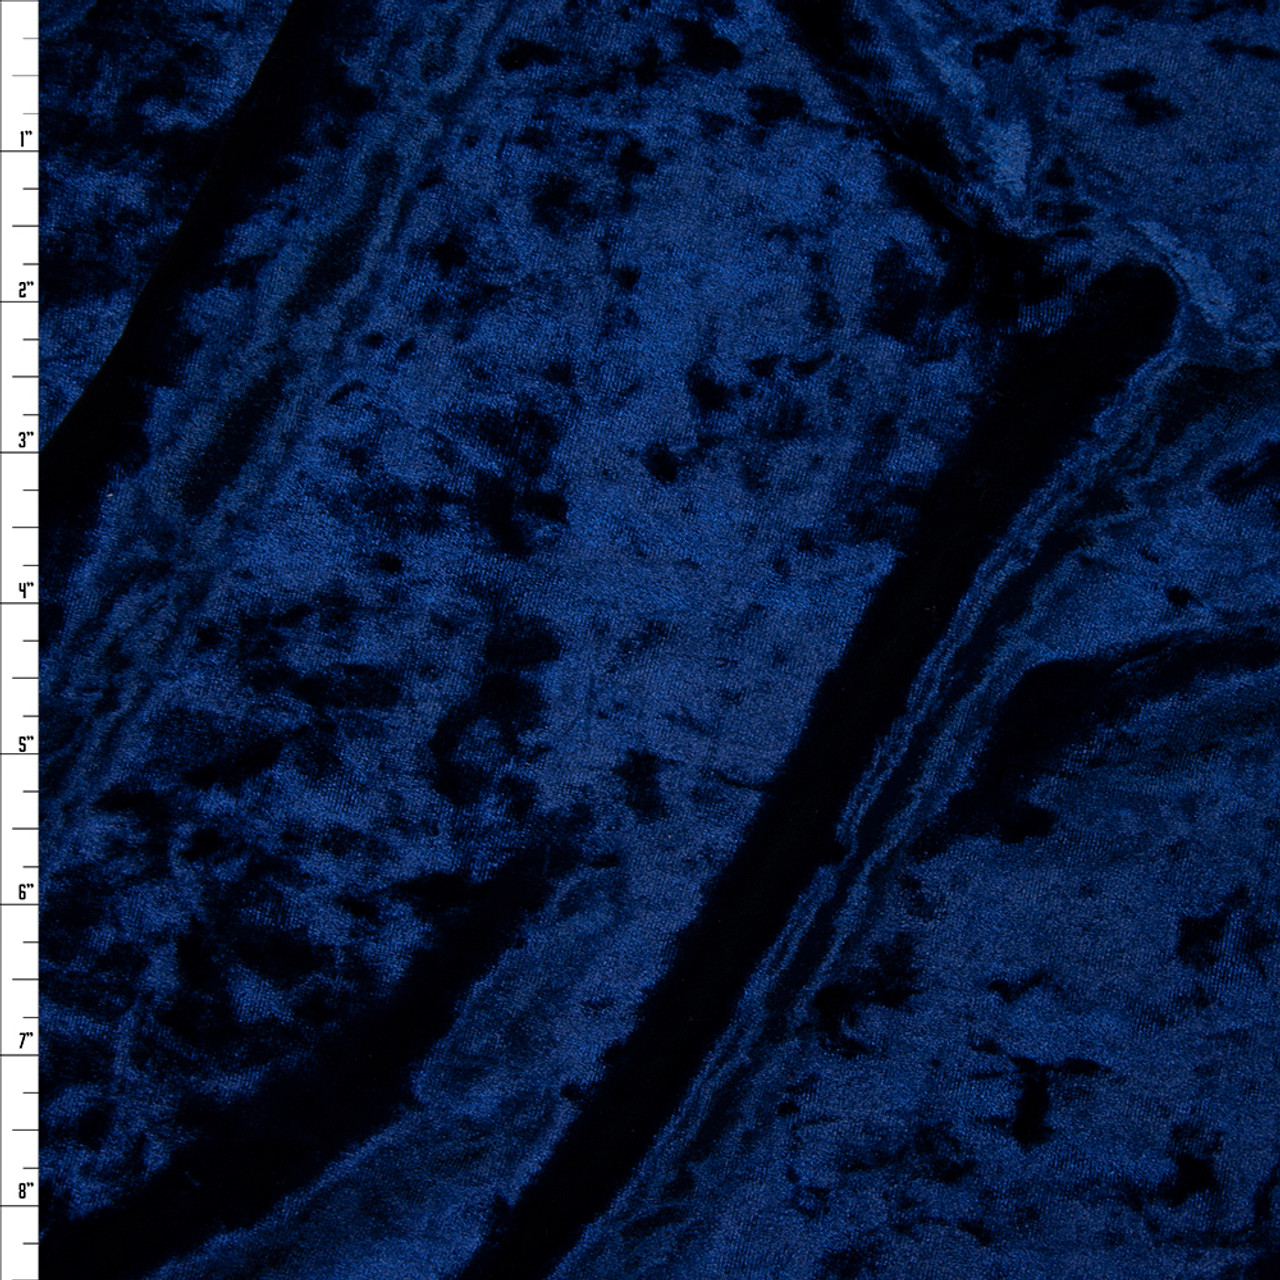 NEW Navy Velvet Fabric by the Yard marble by Secretspark, Dark Blue Velour  Fabric With Stretch, Navy Vintage Crushed Velvet Material -  Singapore